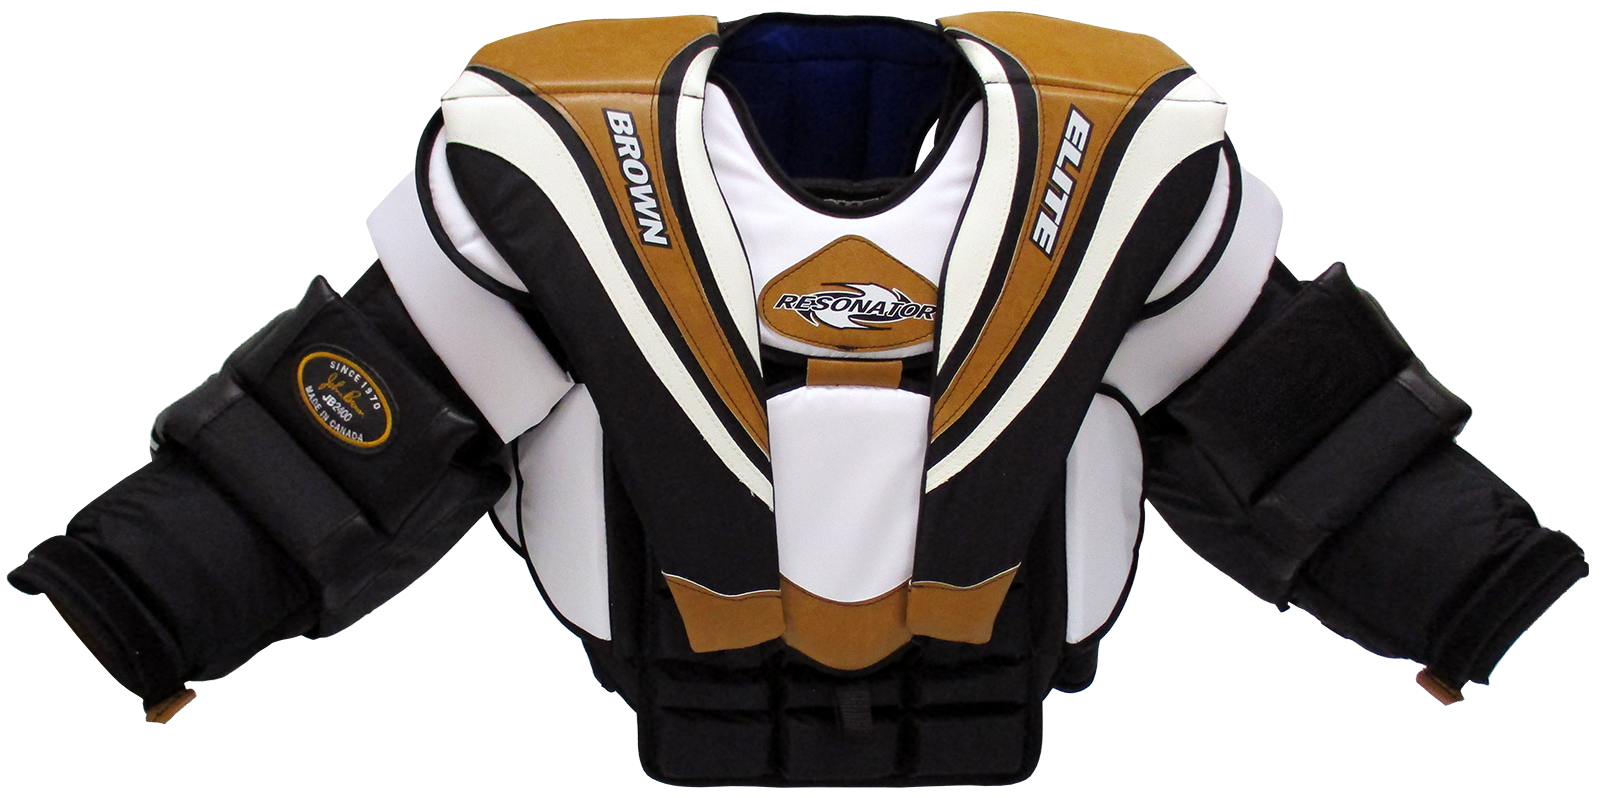 2400 chest protector